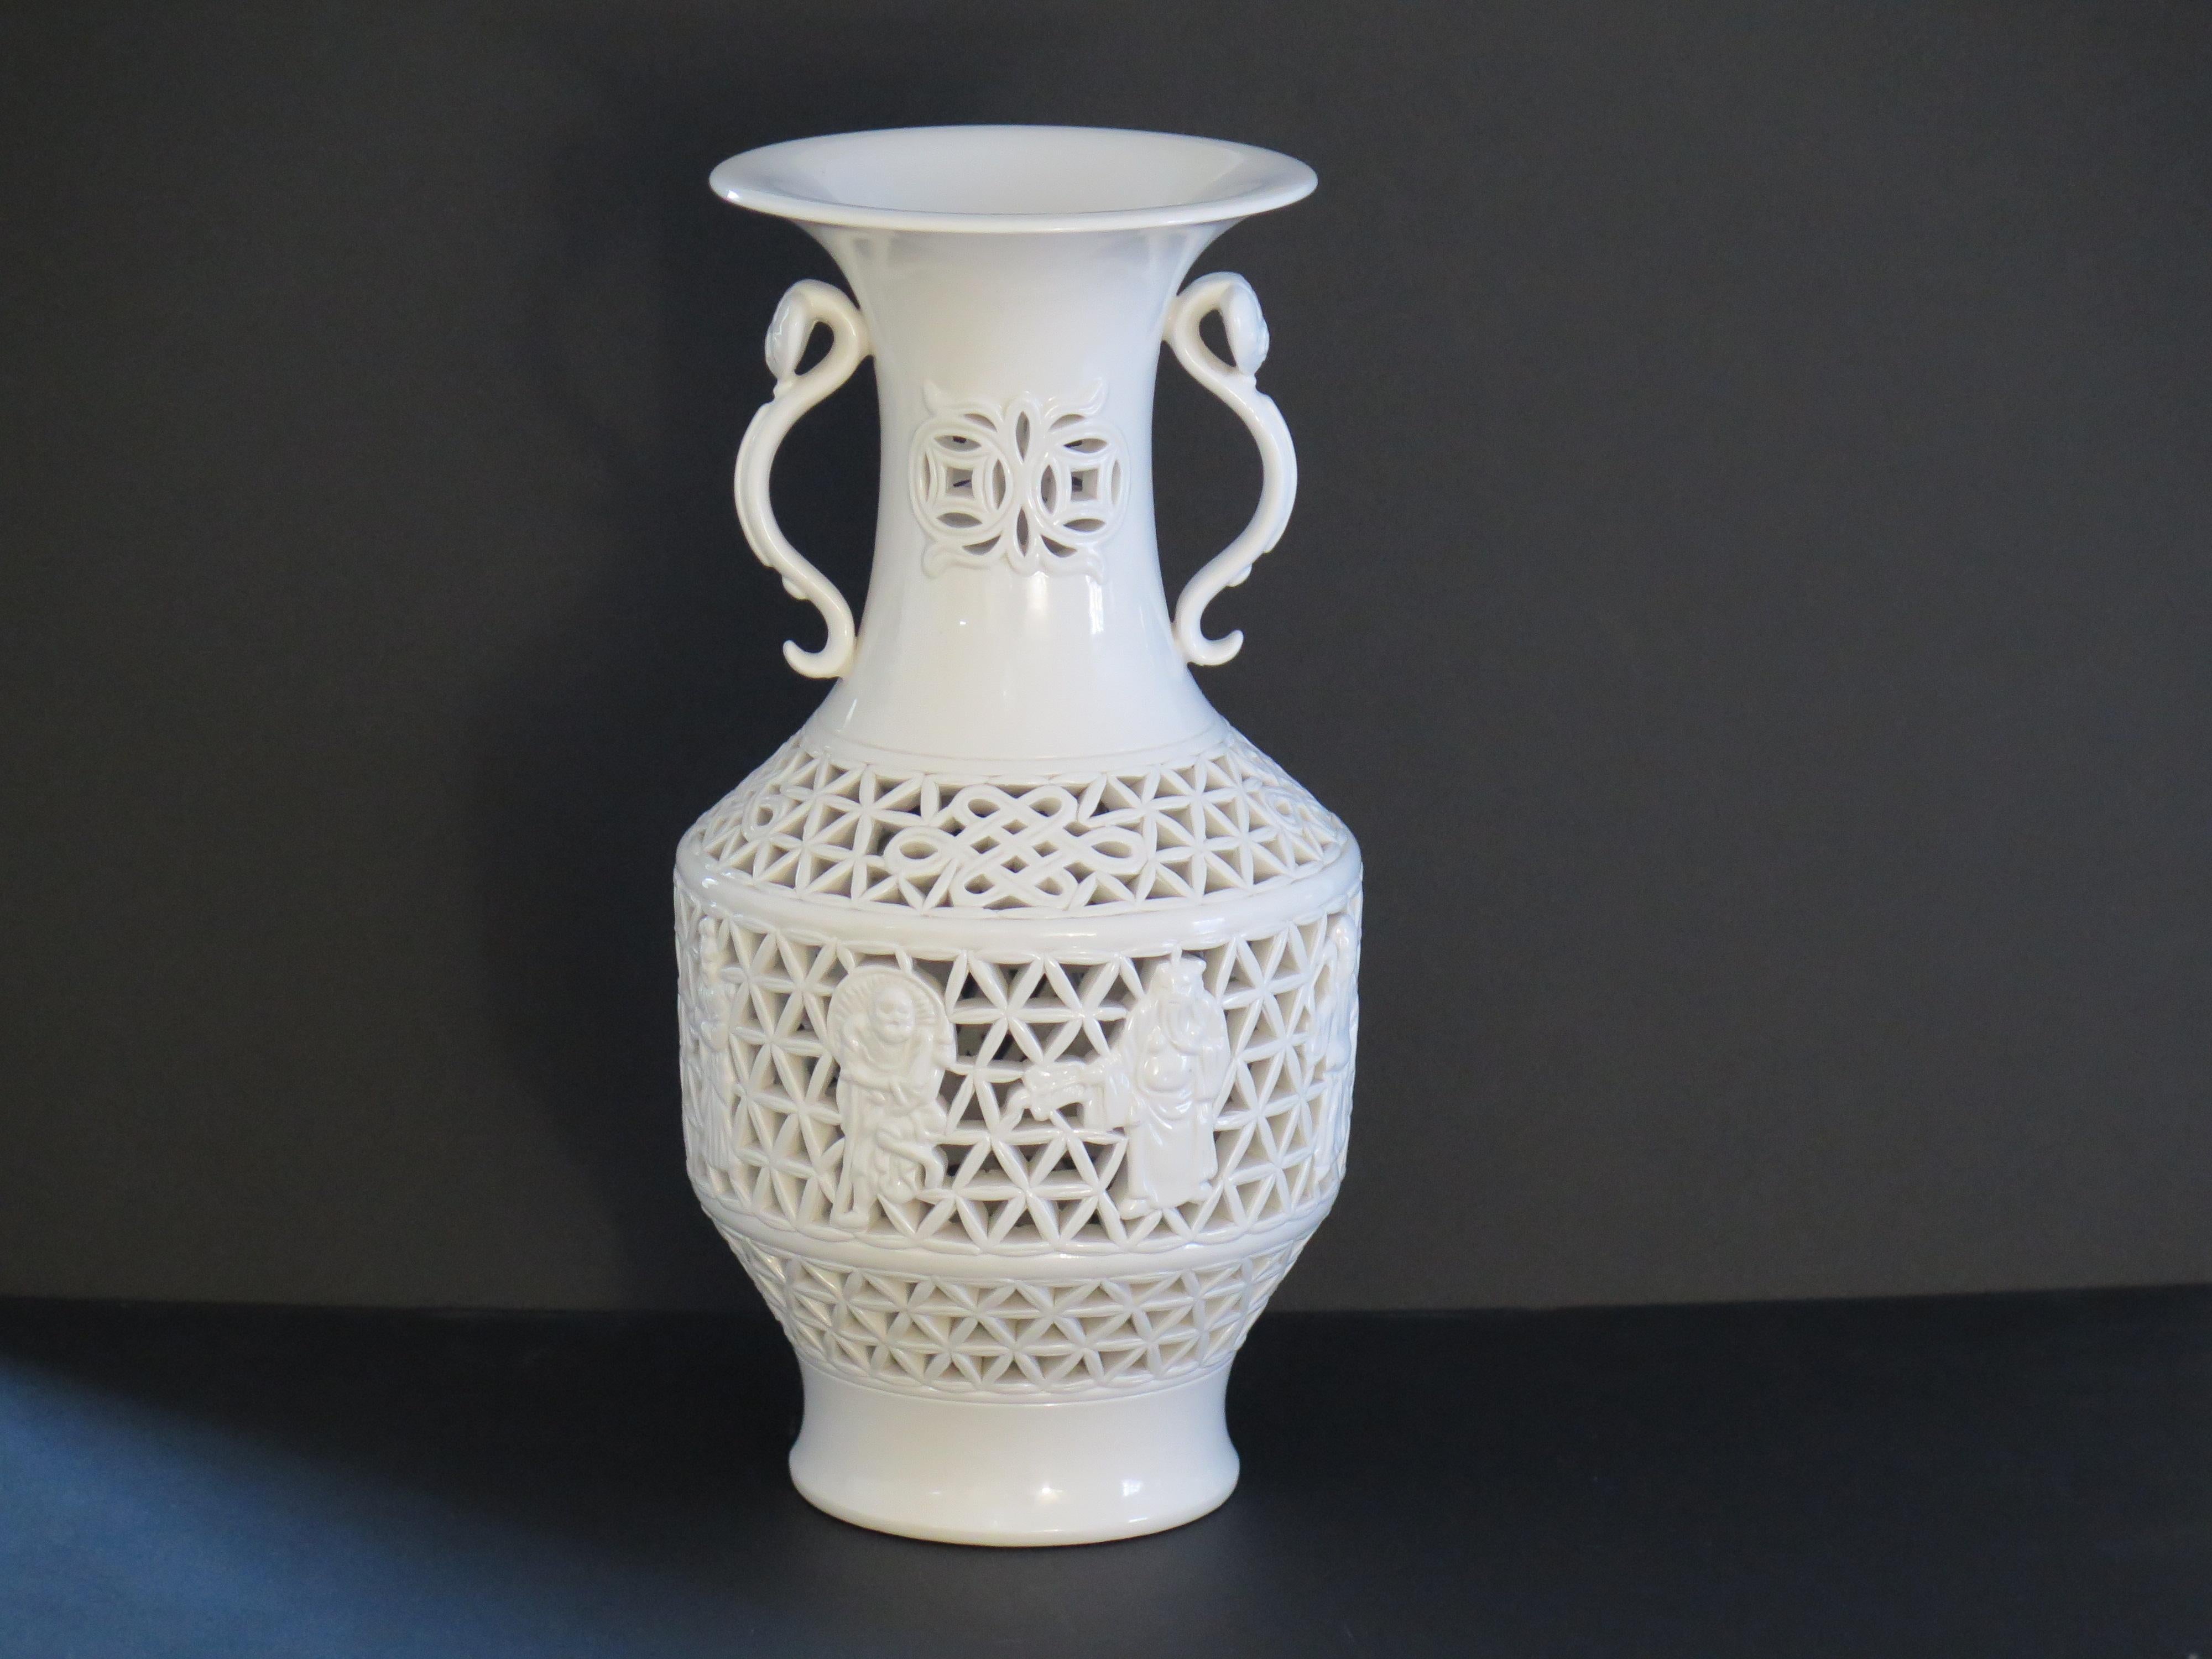 This is a very fine quality Chinese Blanc-De-Chine Vase with a fine reticulated decoration, dating to the Mid 20th Century, Circa 1940.
 
The vase is very well hand potted with a beaker body and flared rim with a glaze colour of a soft creamy white.